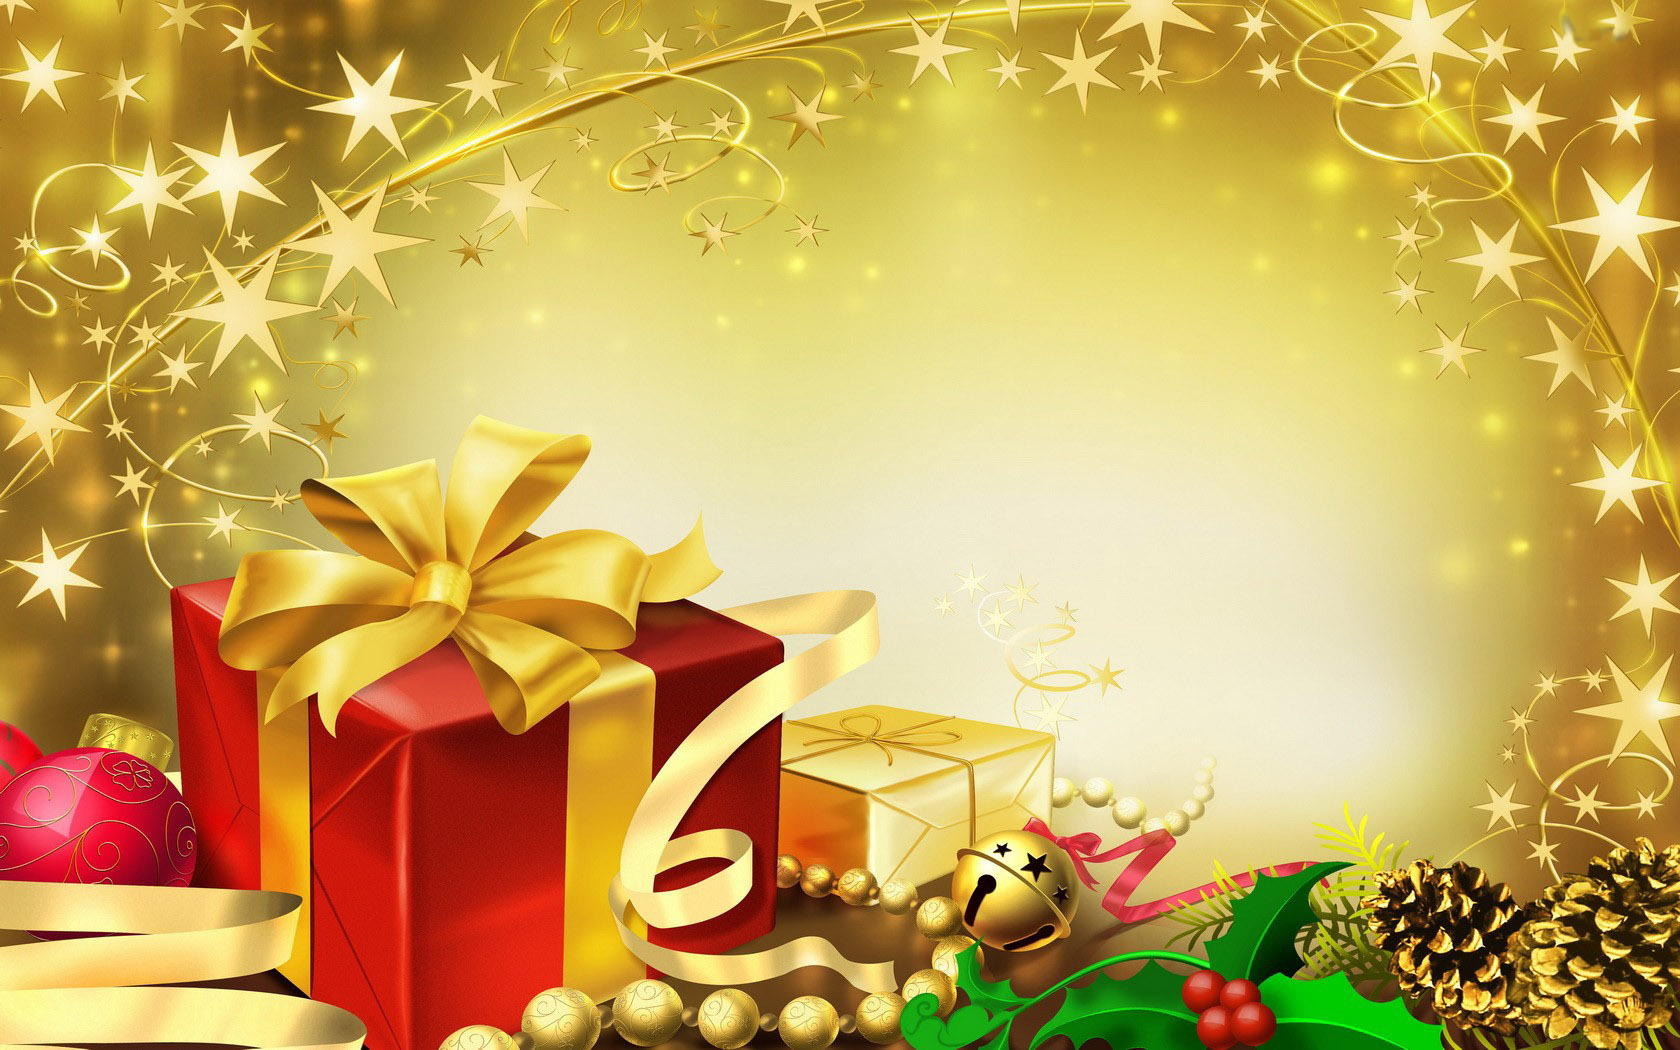 clip art holiday backgrounds - photo #12